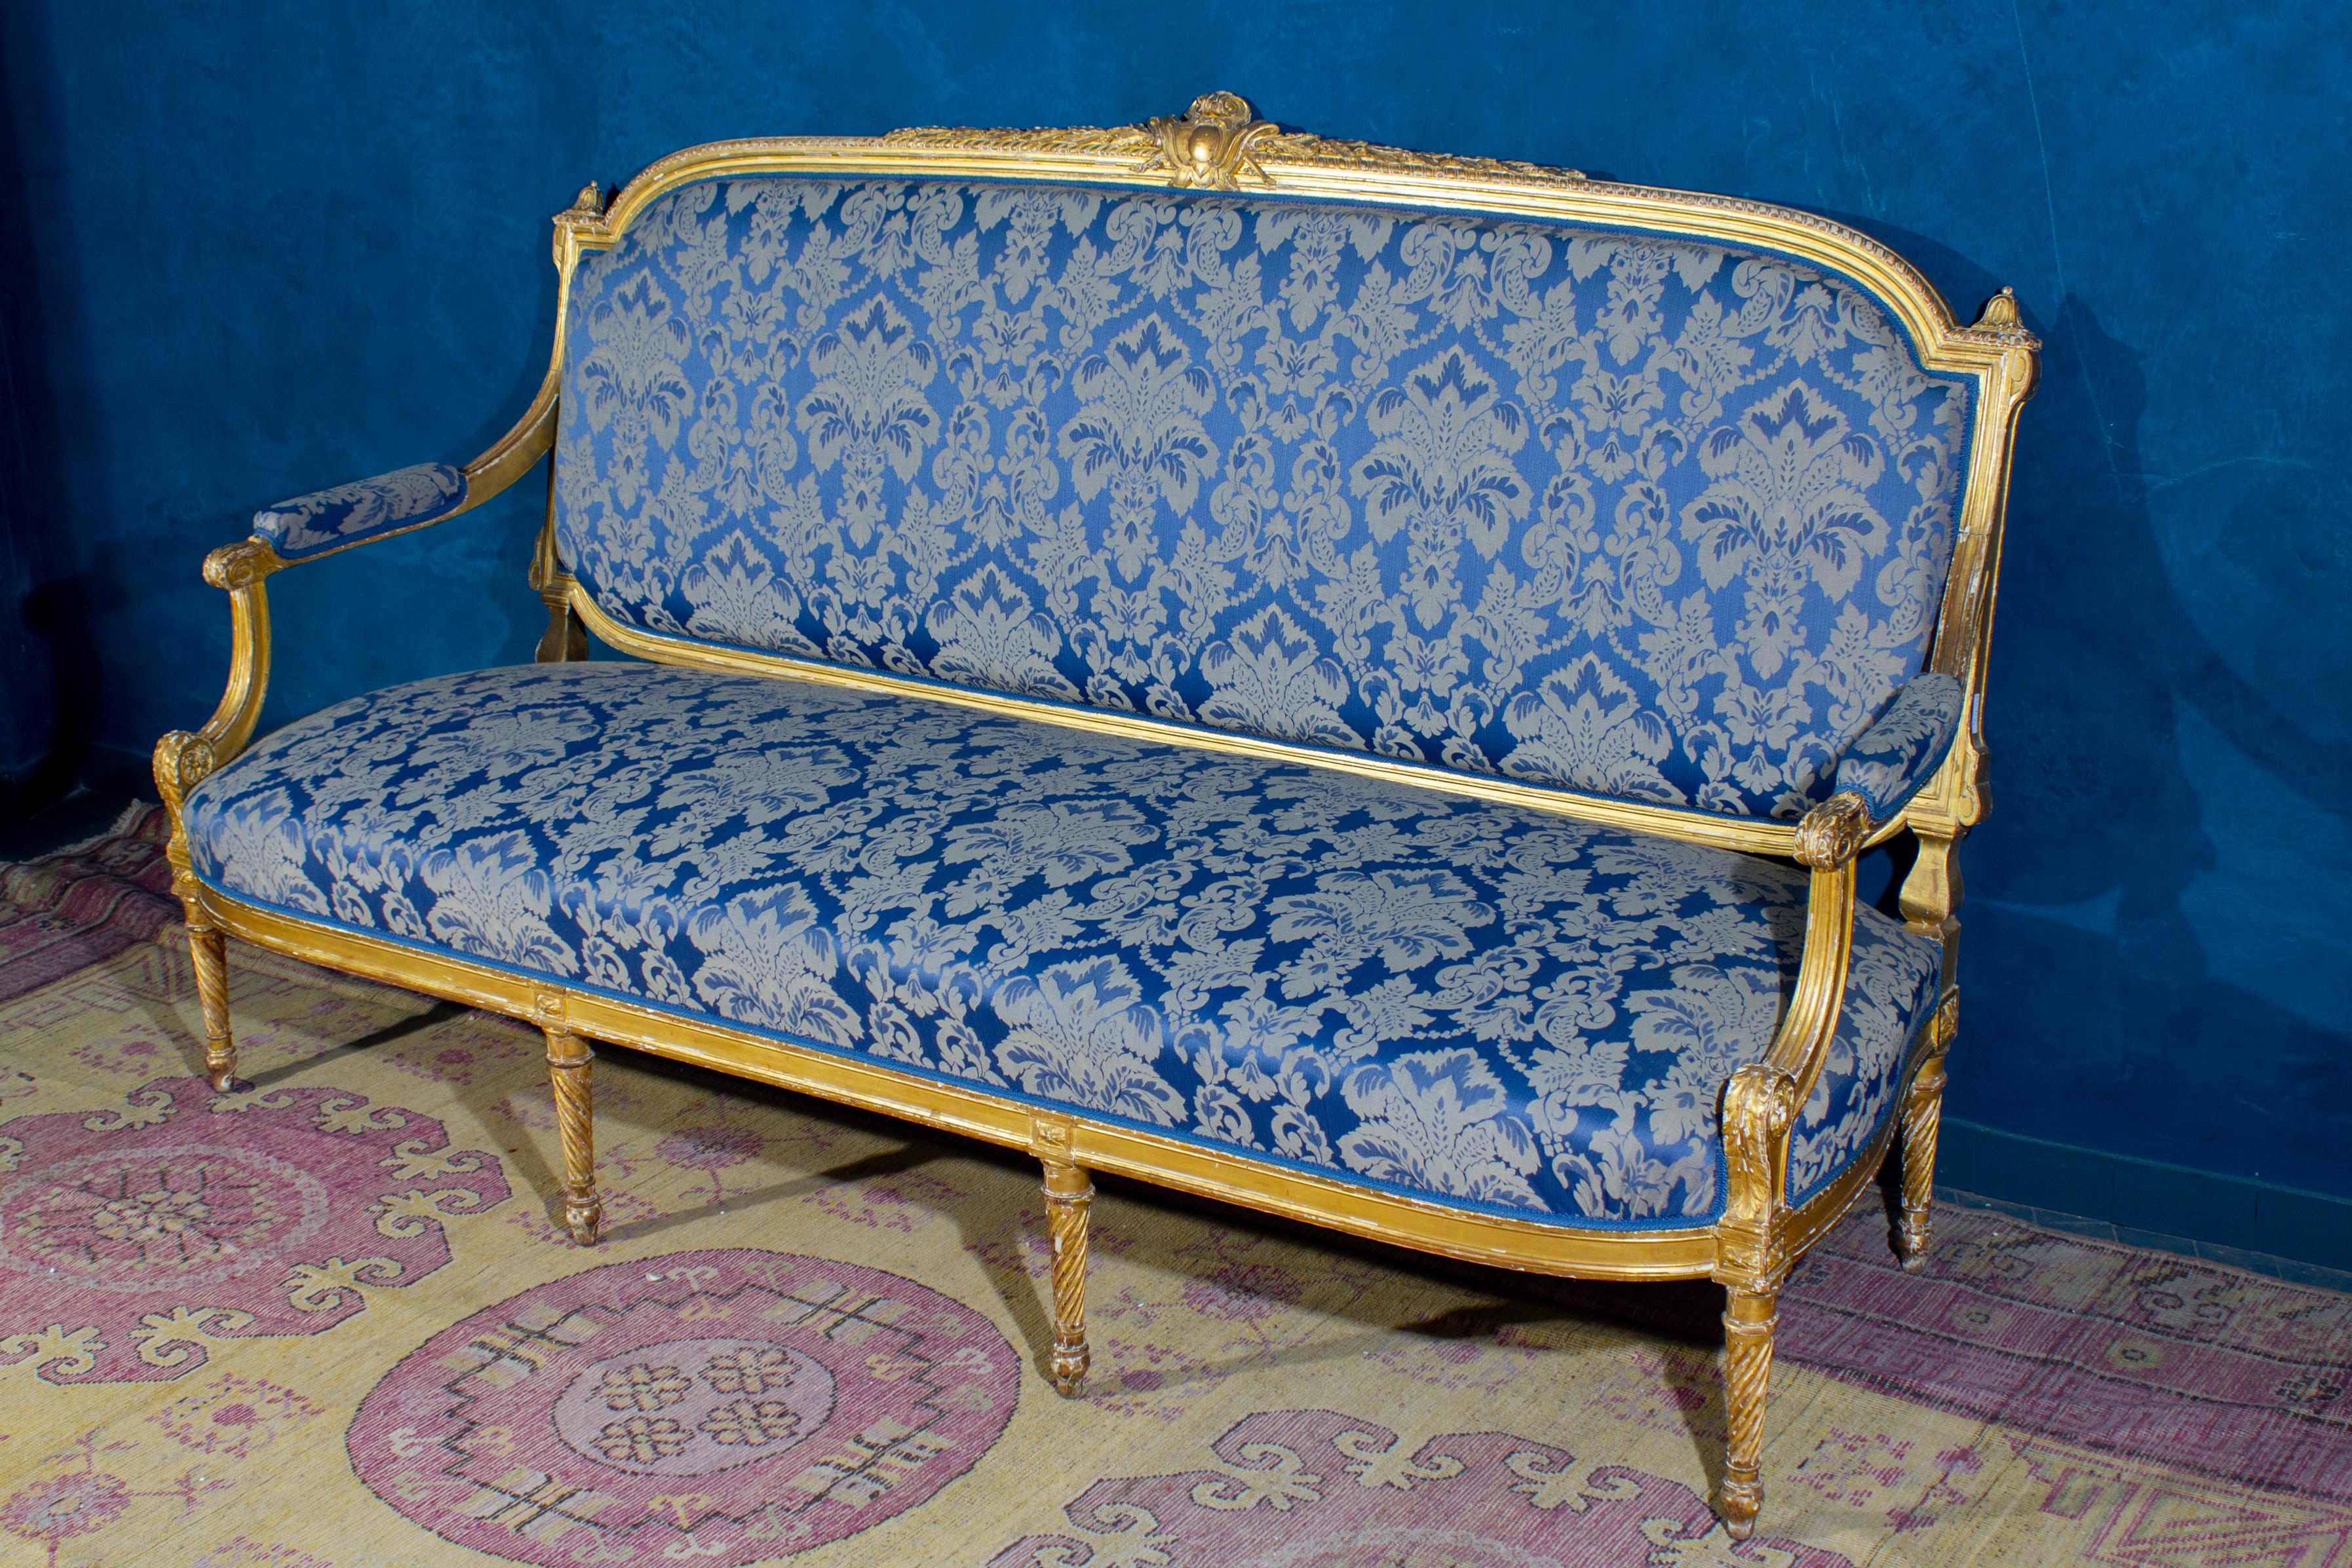 19th Century Elegant French 19' Century Gilt Living Room Suite with a Sofa and Four Armchairs For Sale